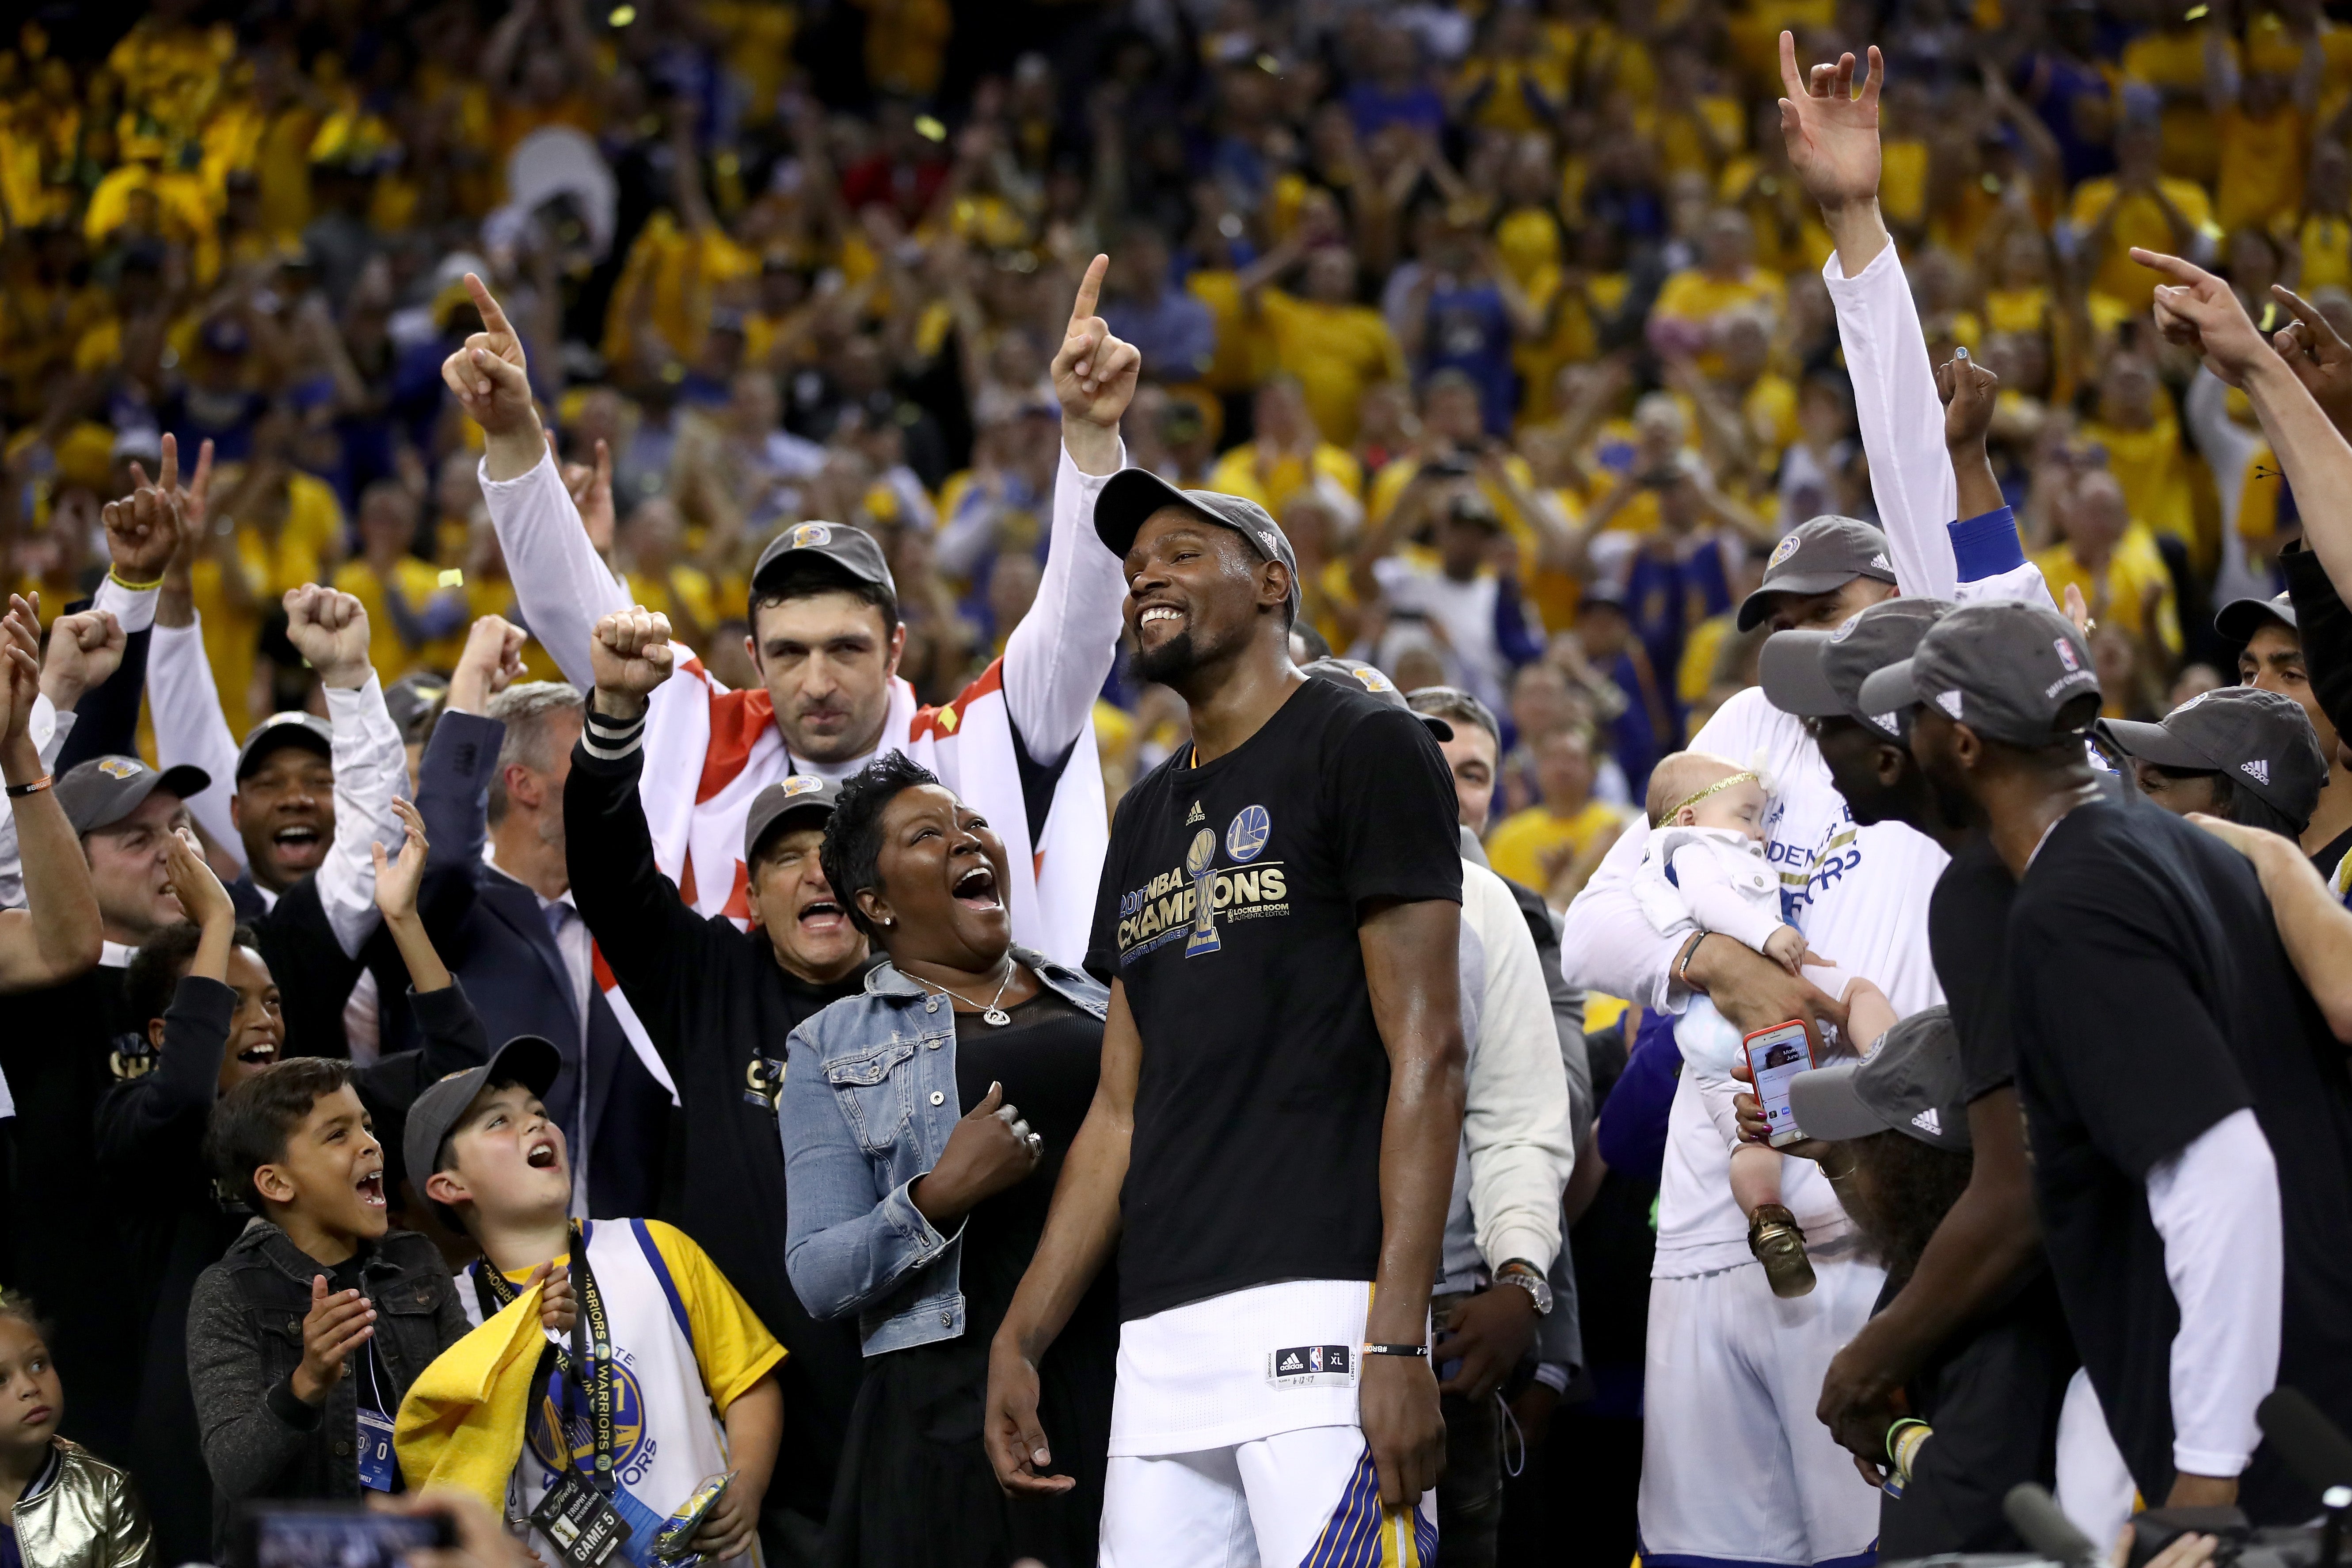 The NBA Finals Were A Star-Studded Event On And Off The Court
